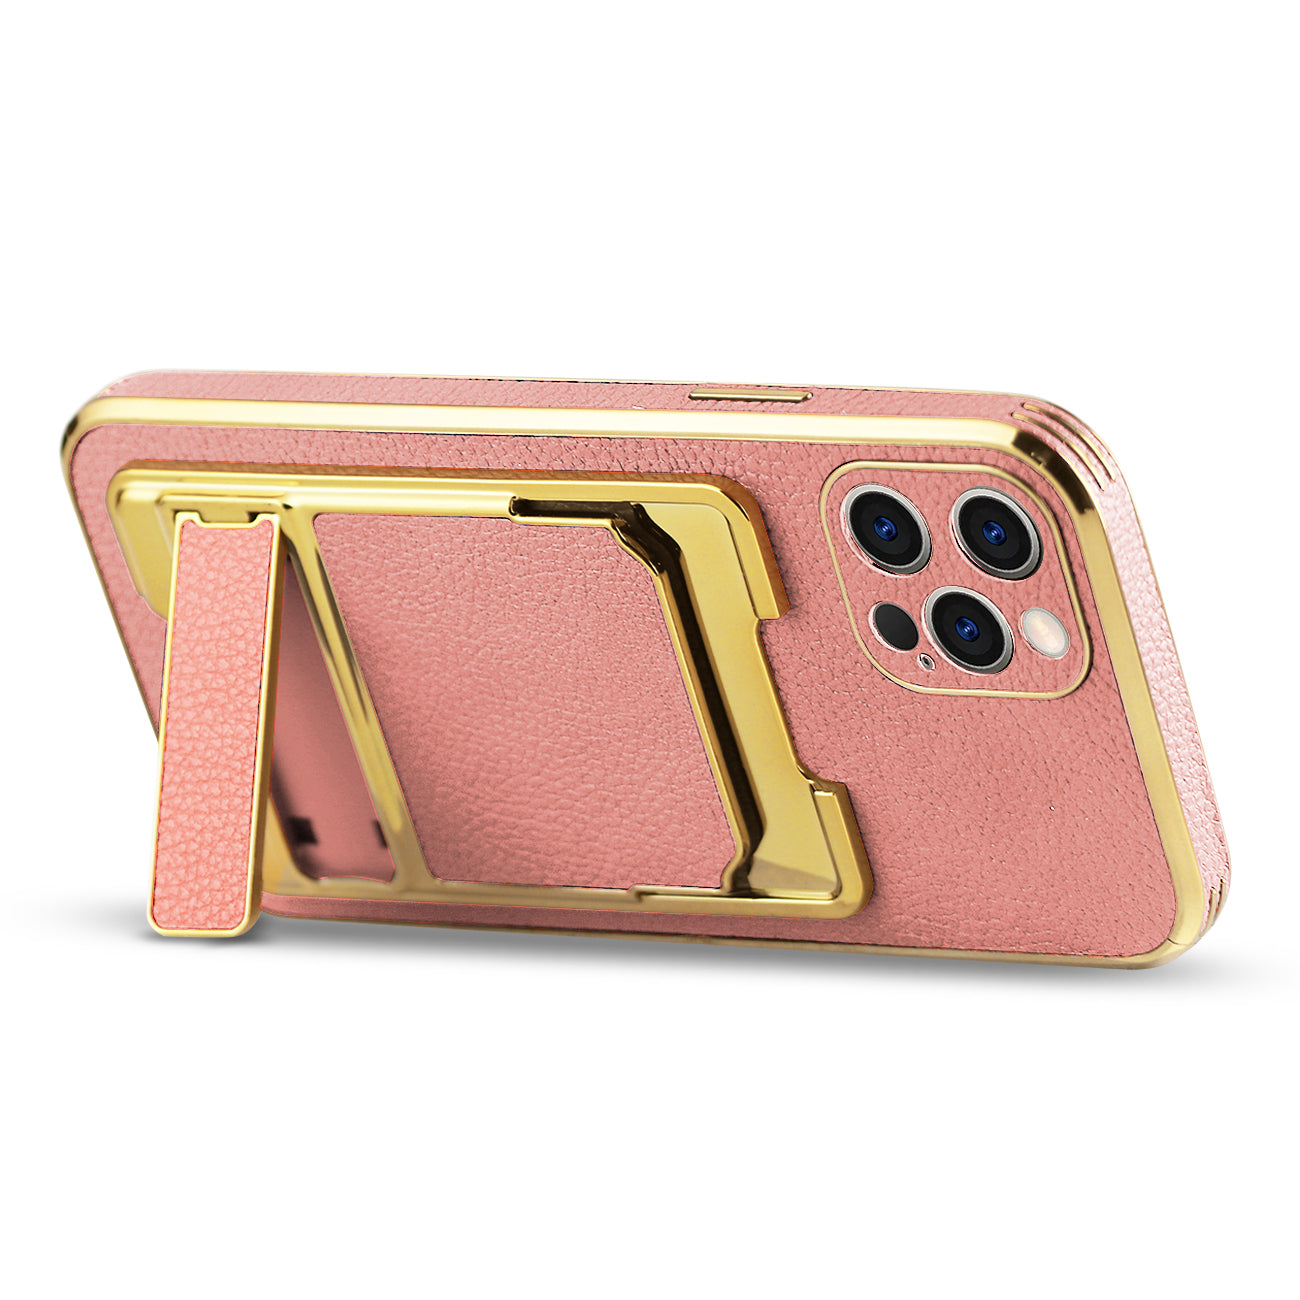 IPHONE 12 Max Leather Case with Card Holder In Pink